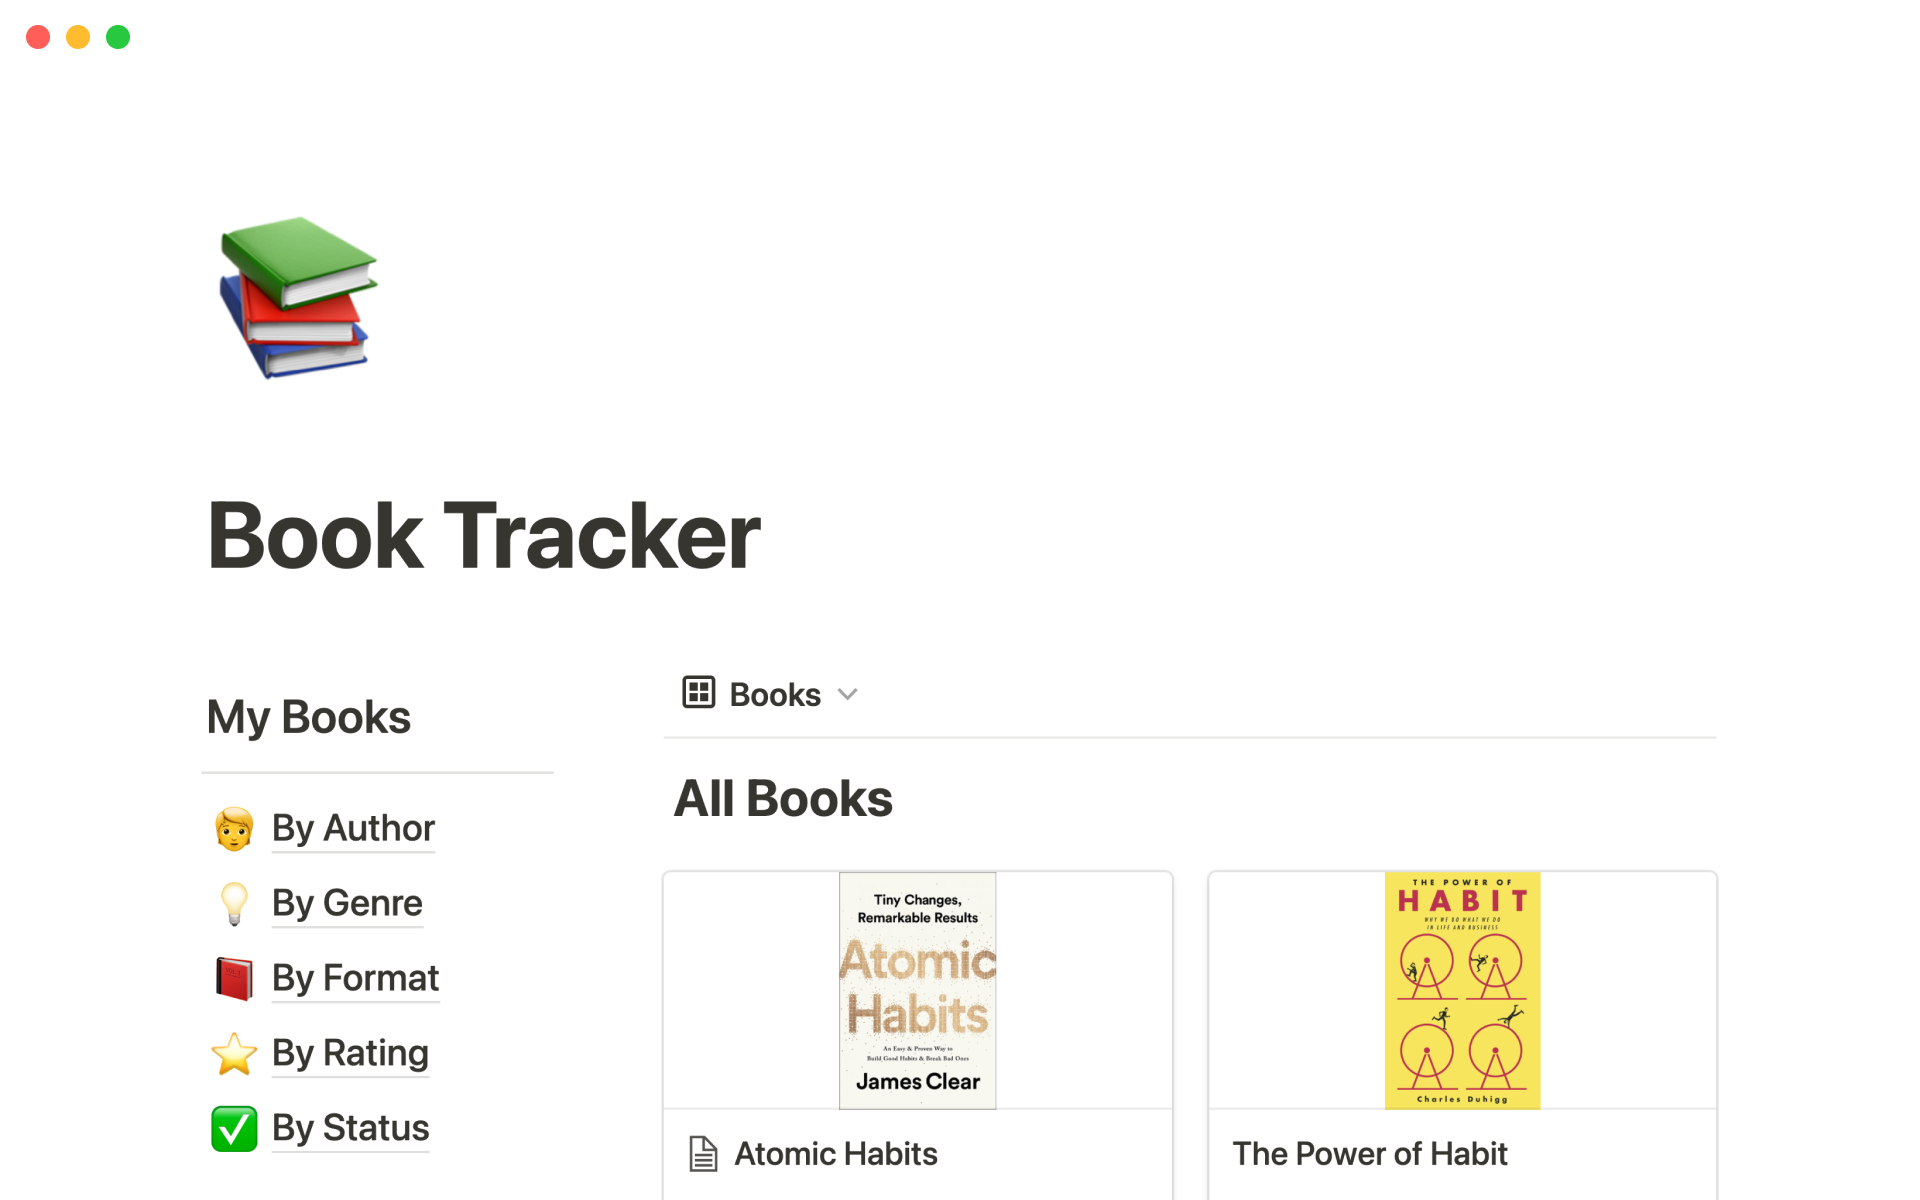 Easily track your books, reading progress, authors, genres, formats, ratings, and more.